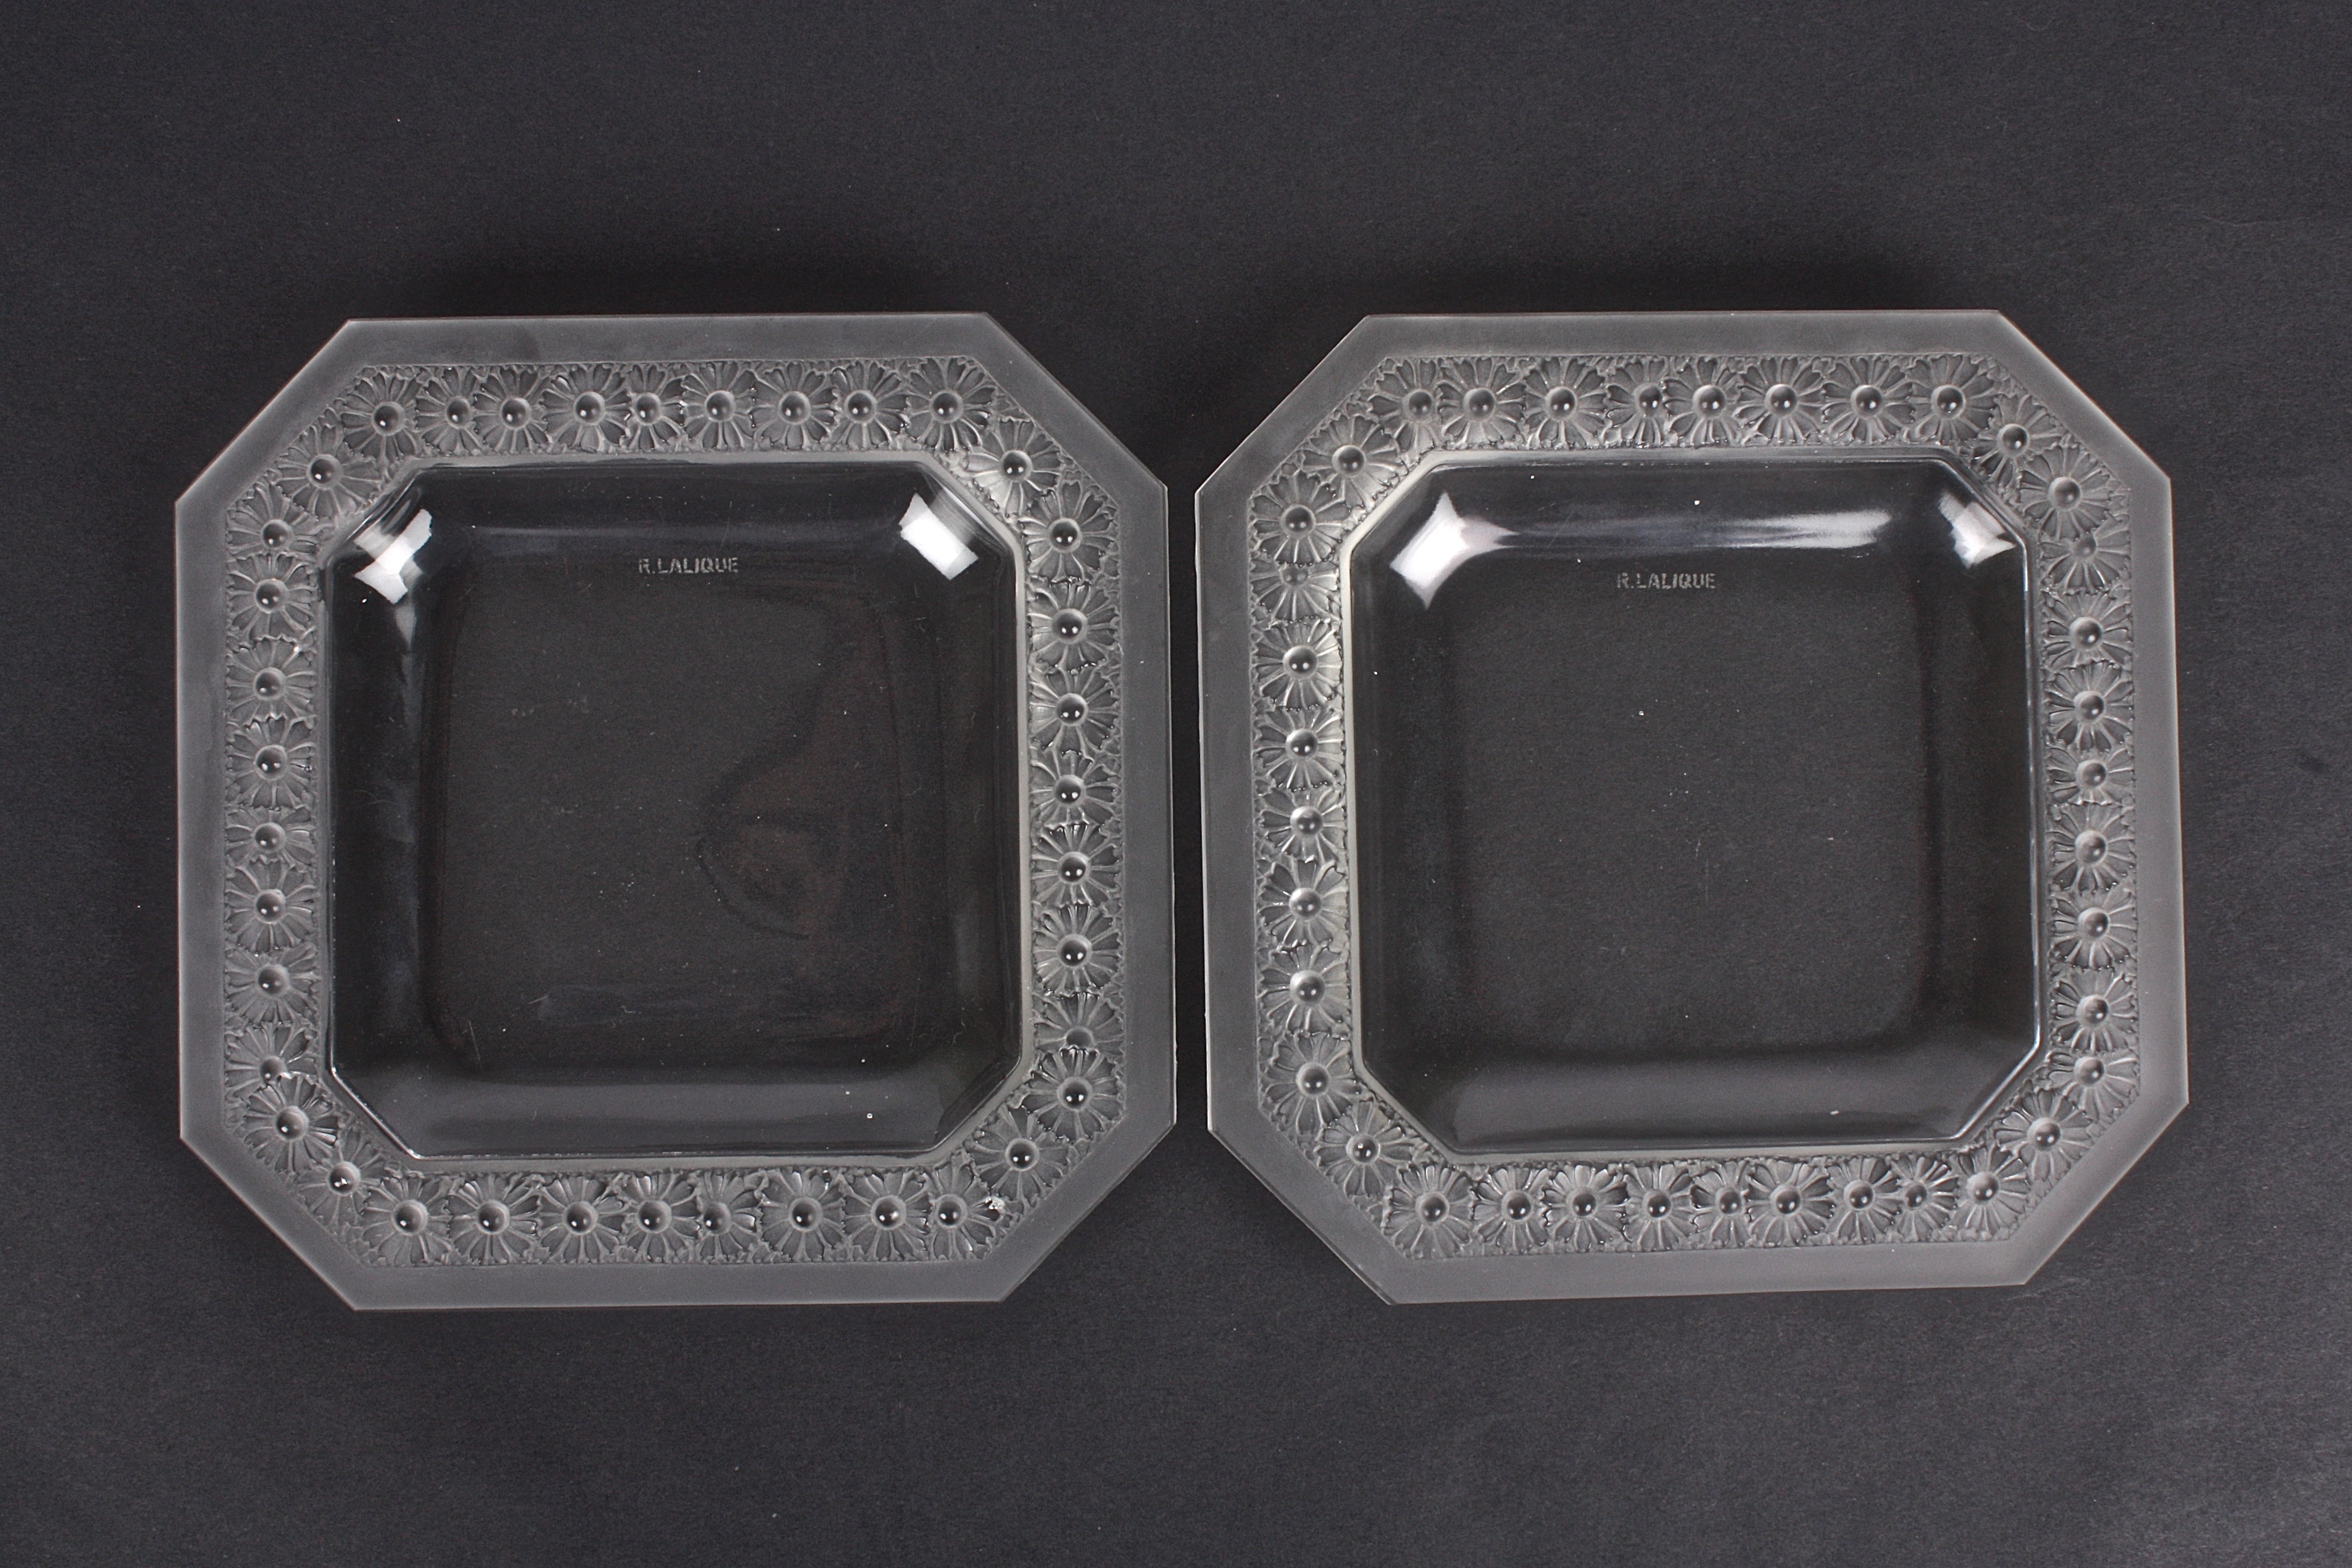 A pair of R. Lalique 'Paquerettes' square frosted glass dishes
the rims moulded with daisies, with